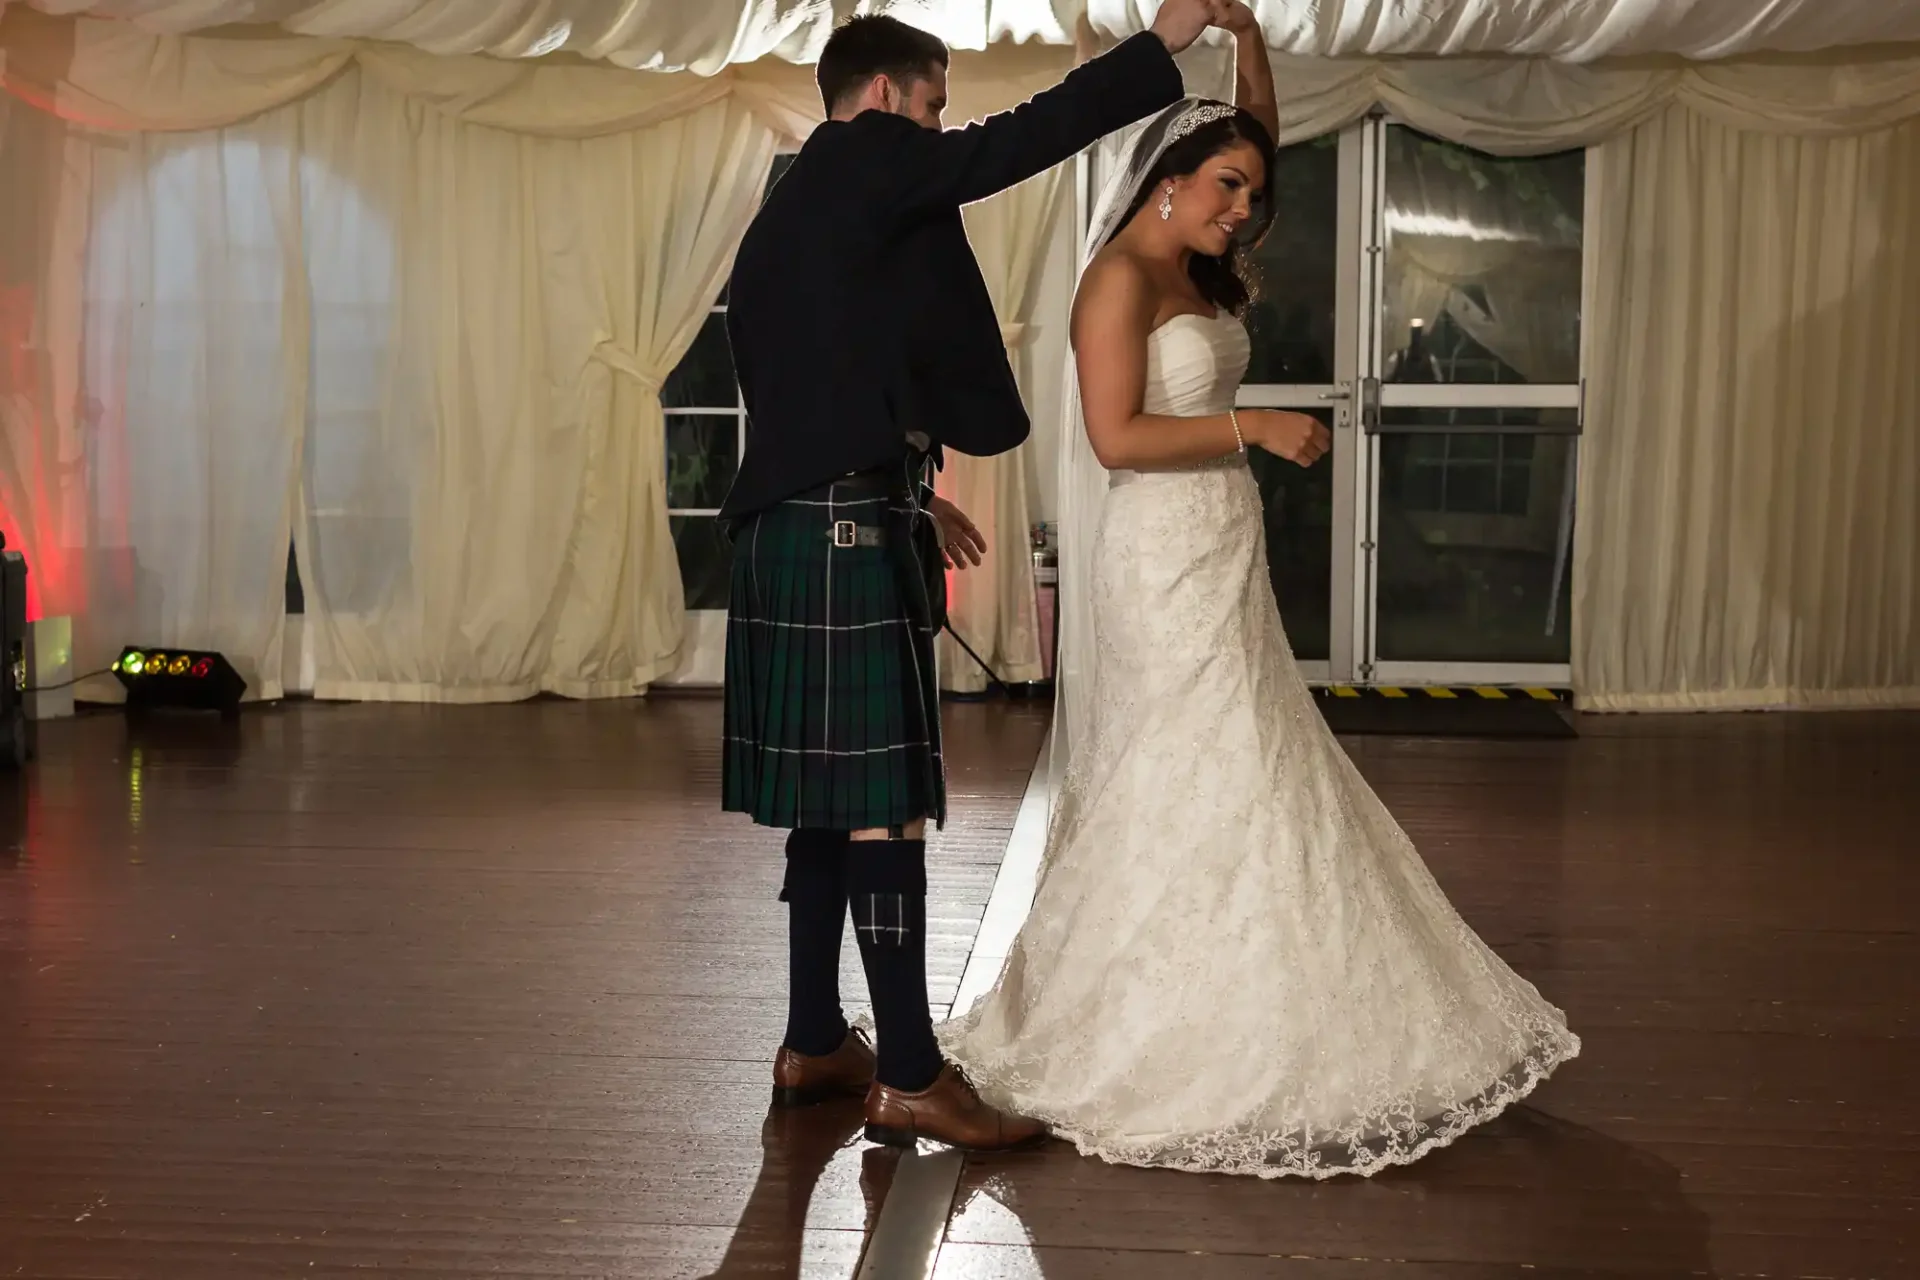 A bride and groom share a dance at their wedding reception, the groom wearing a traditional kilt.